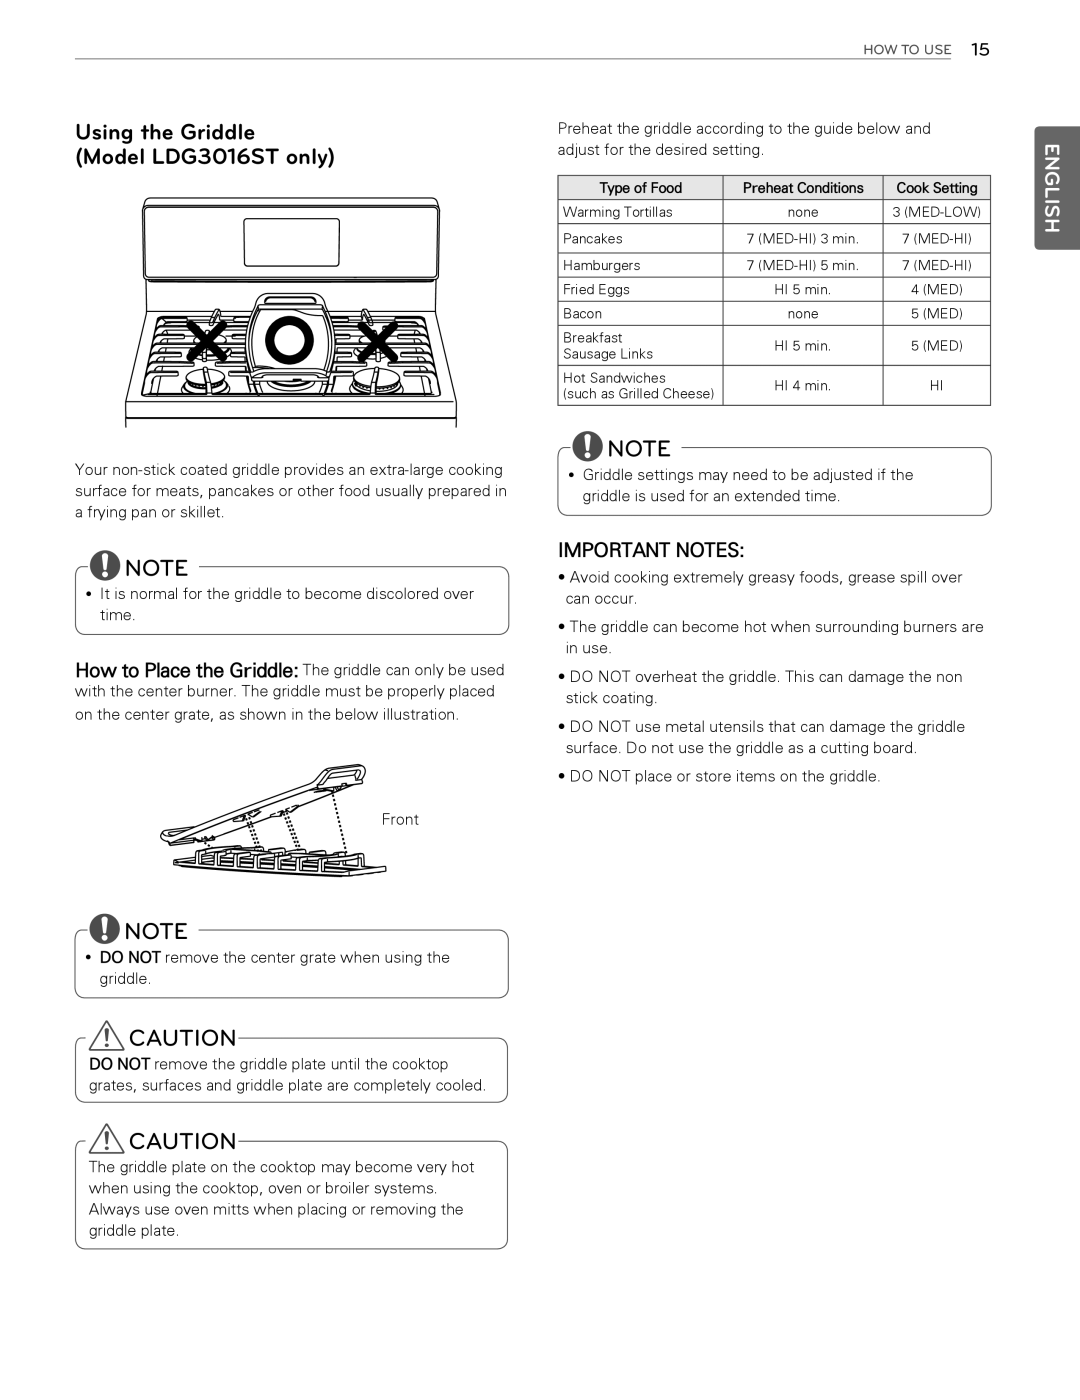 LG Electronics LDG3015SB, LDG3015ST, LDG3015SW owner manual Using the Griddle, Model LDG3016ST only, English, Important Notes 